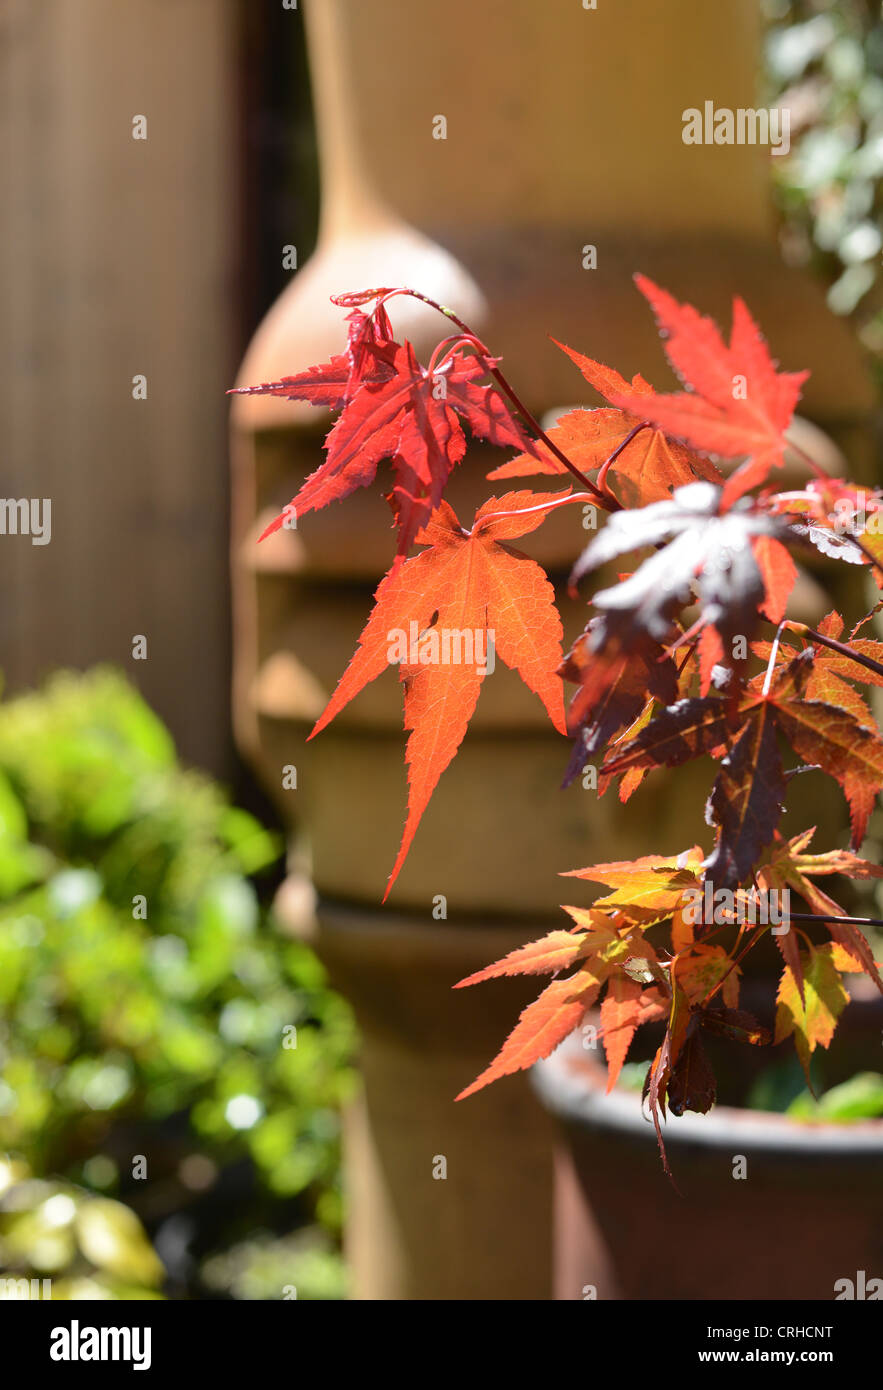 Japanese Acer growing in a pot in a garden in the UK on a sunny day Stock Photo